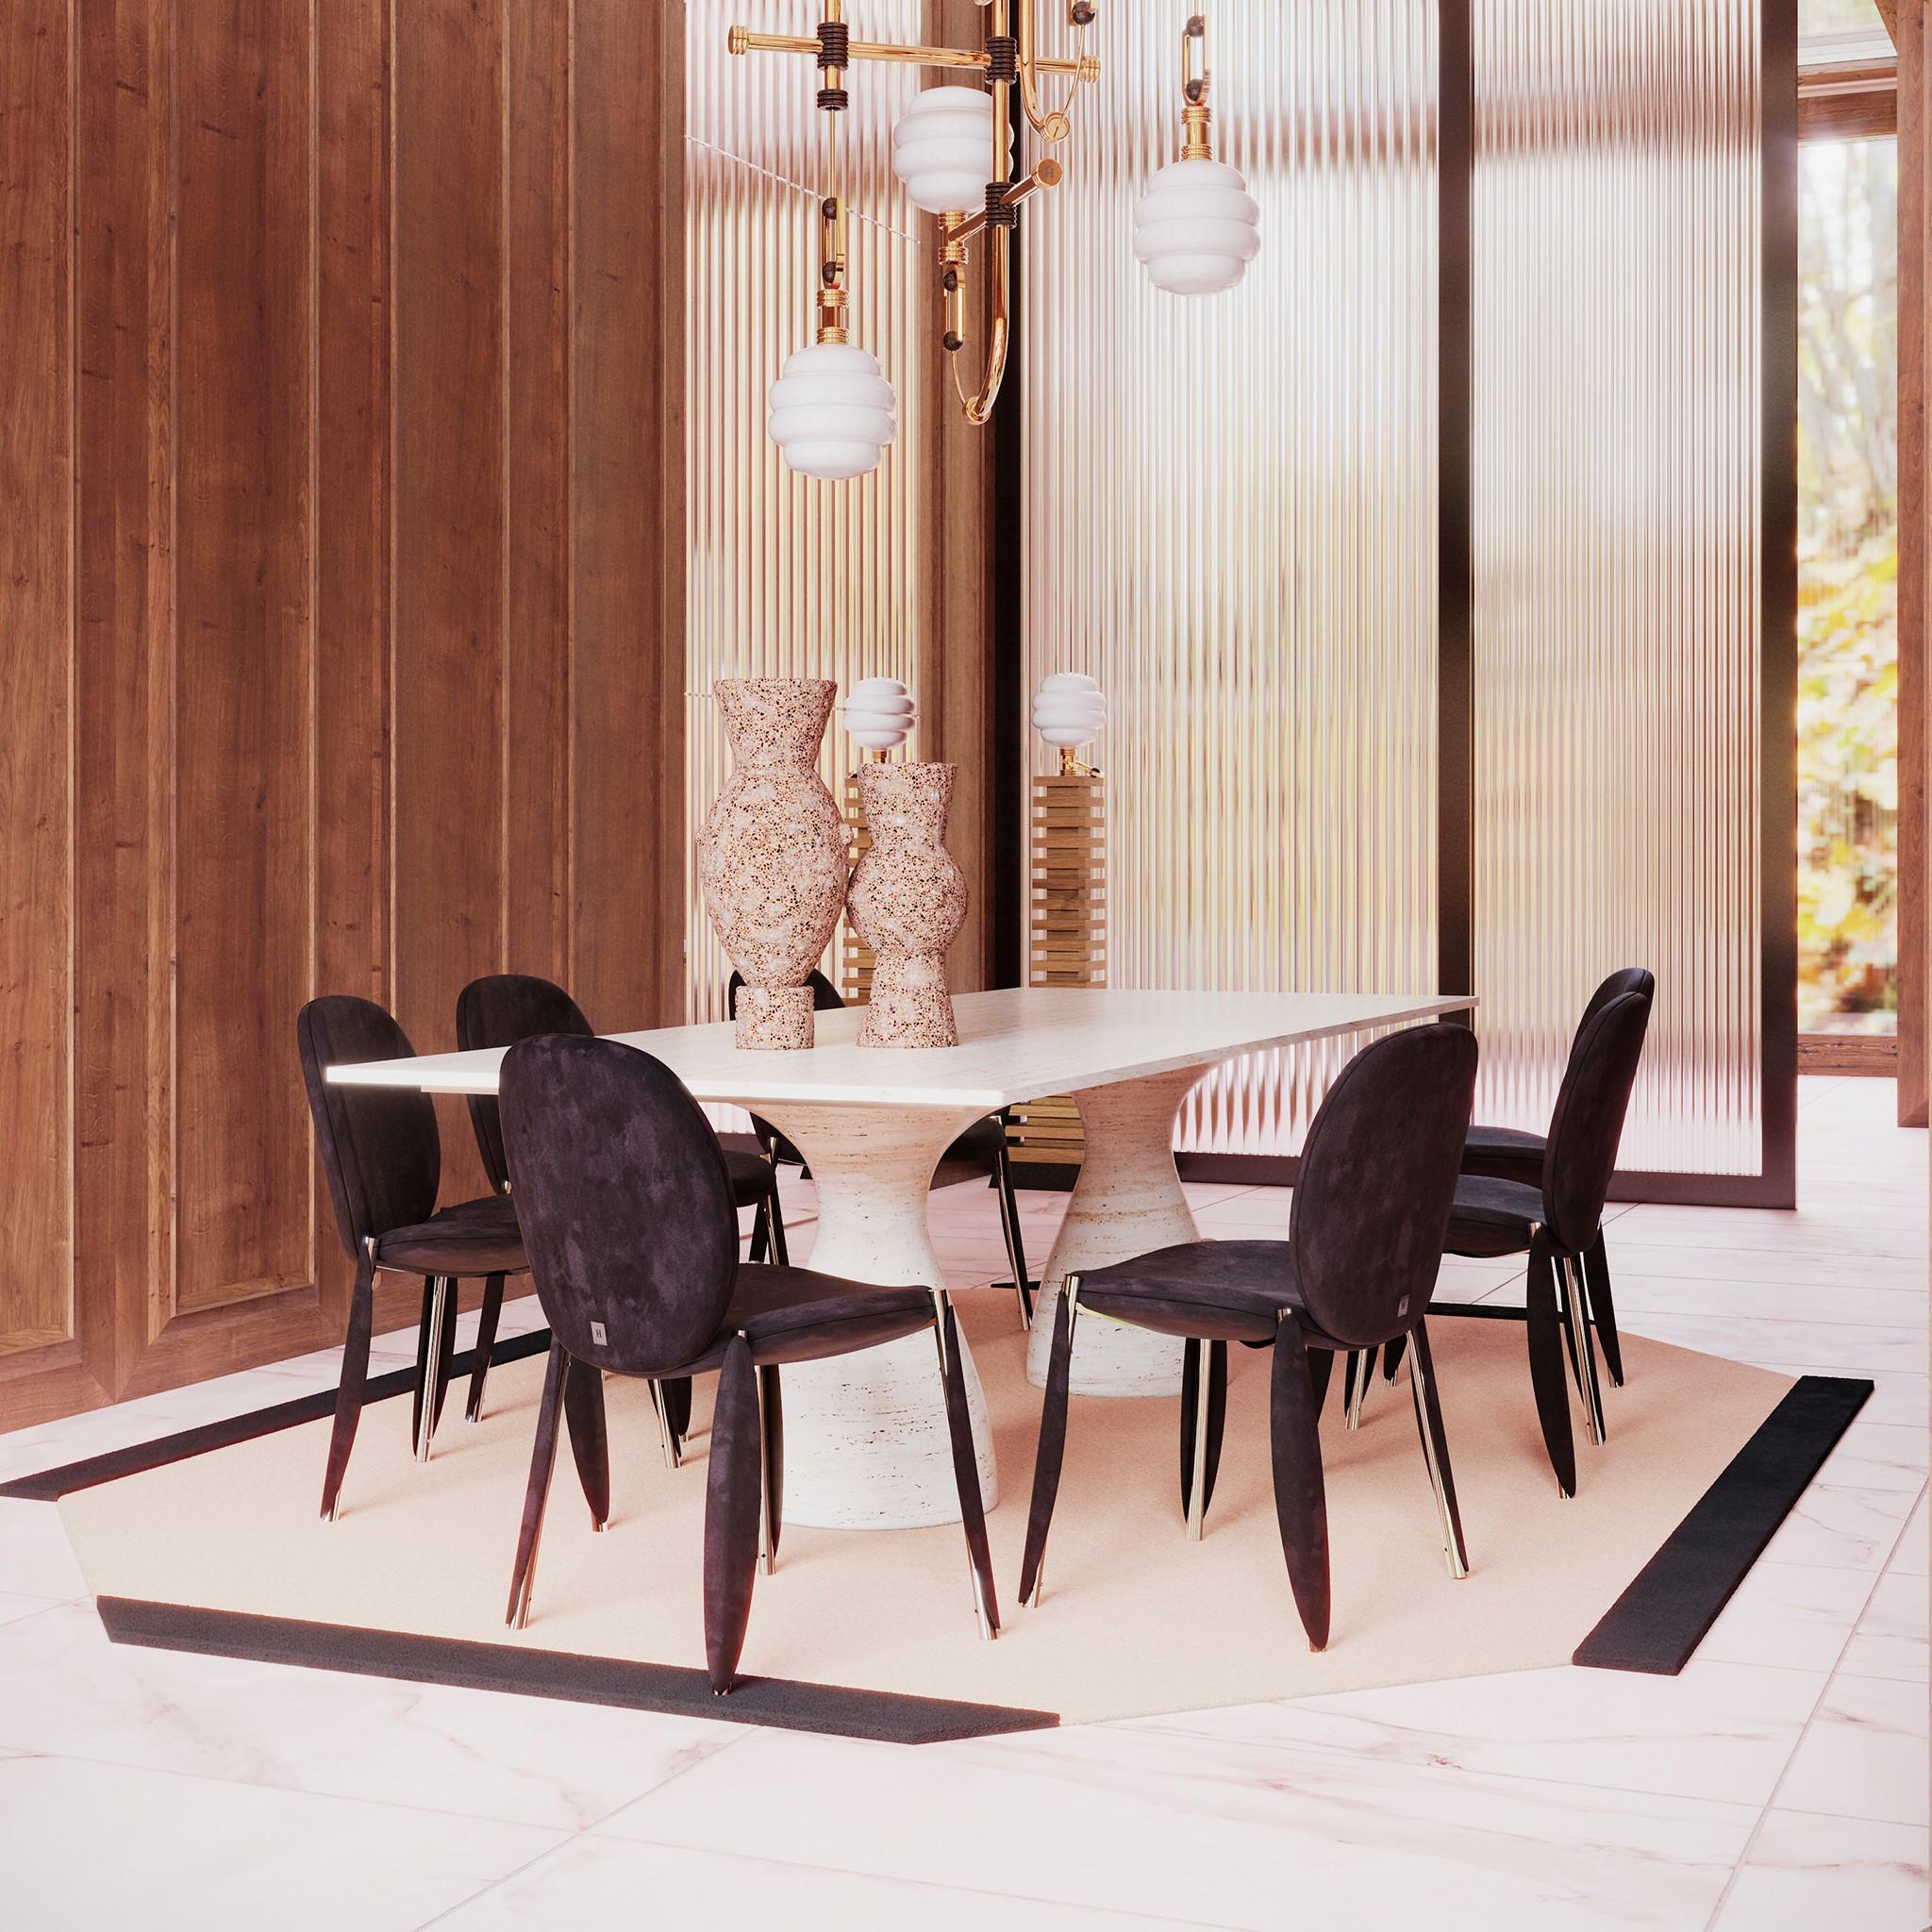 Zimmer Dining Table Travertine is a modern dining table with a delicious texture and a rich swirl of natural colors. With peculiar modernity, a rectangular top, and chunky turned legs, Zimmer modern dining table in travertine creates a warm yet